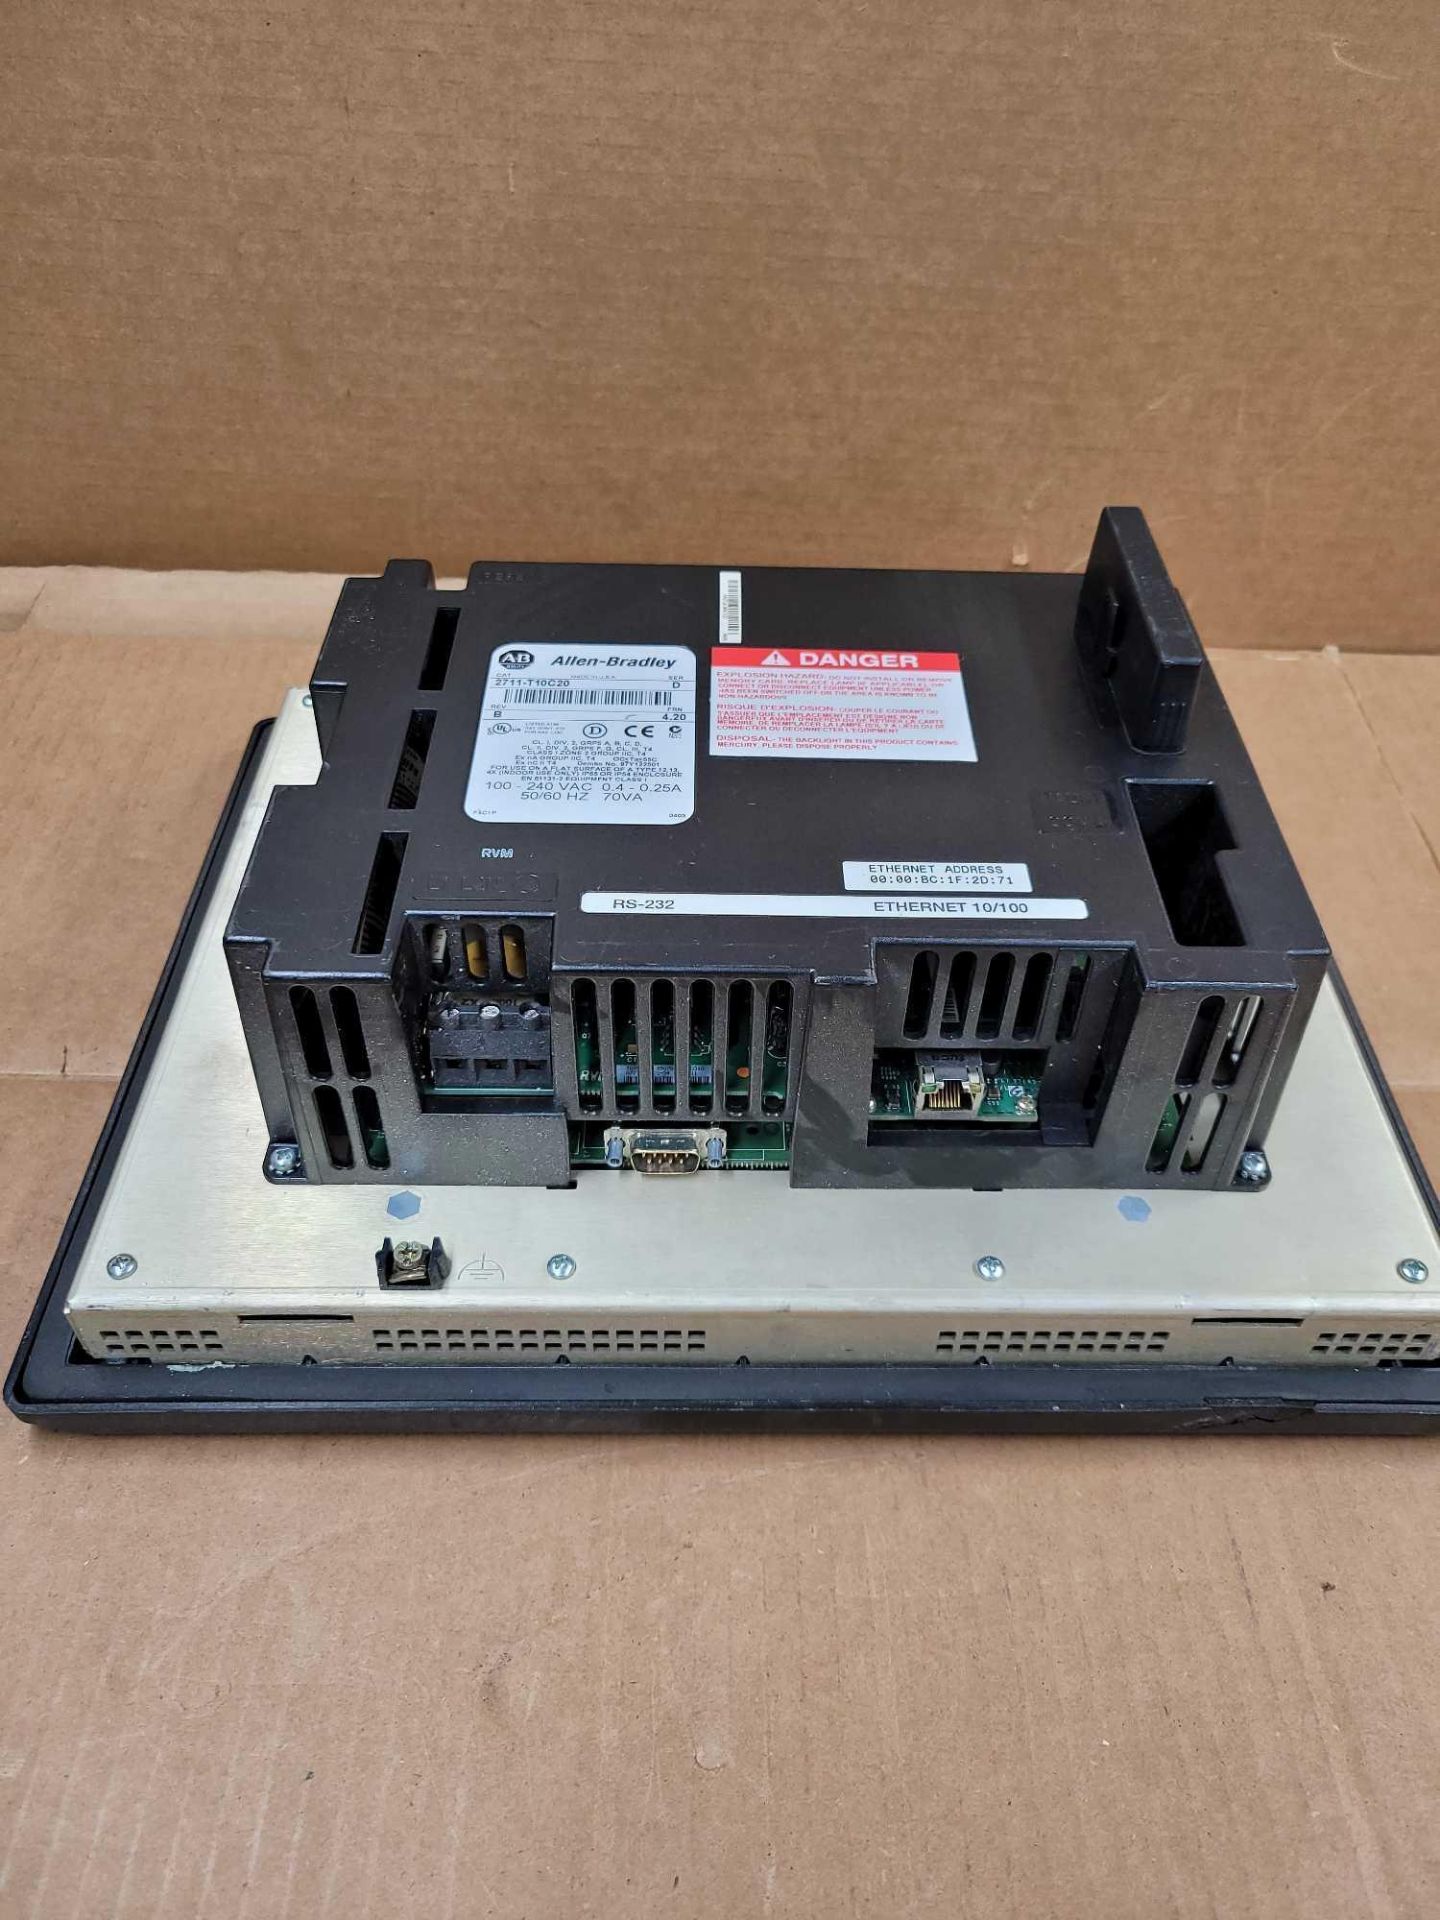 ALLEN BRADLEY 2711-T10C20 / Series D PanelView 1000 Operator Interface  /  Lot Weight: 6.6 lbs - Image 4 of 5